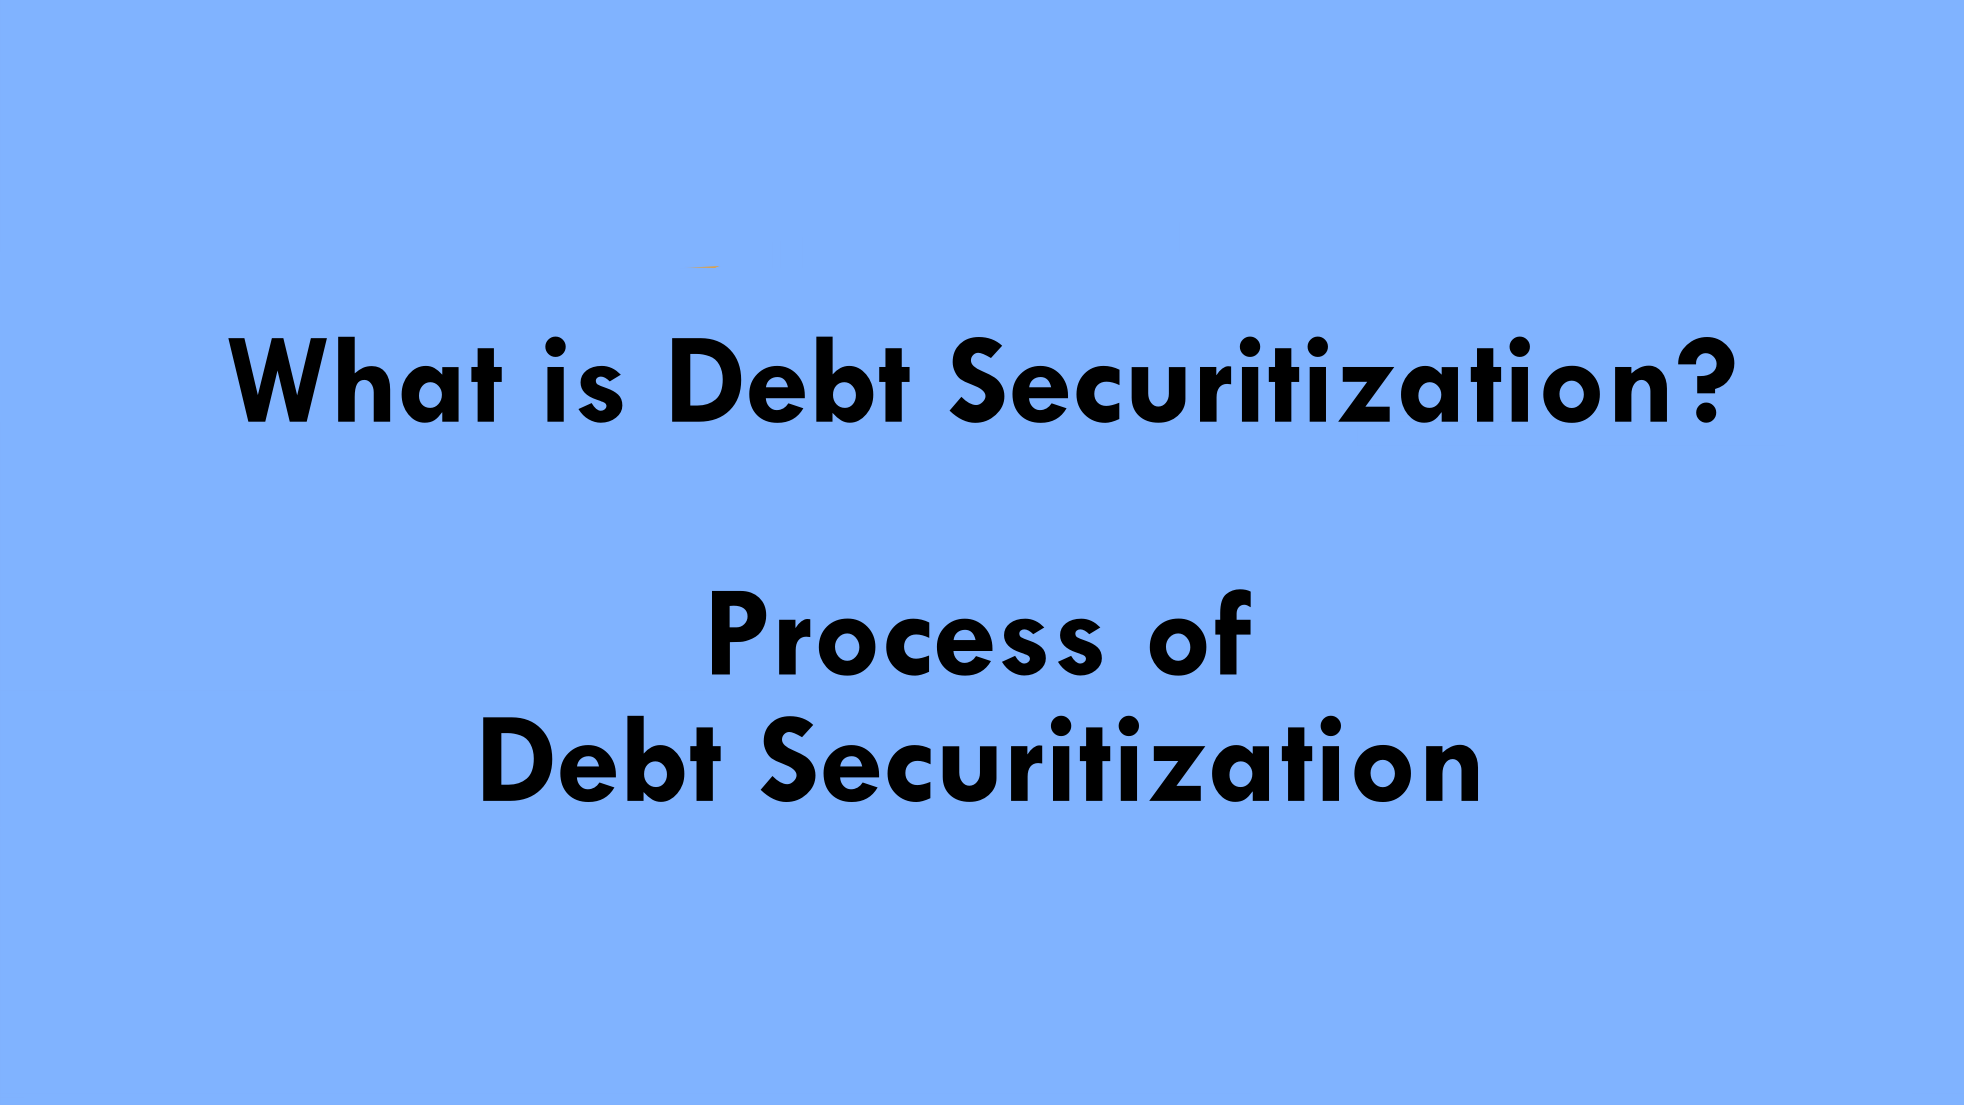 What is Debt Securitization